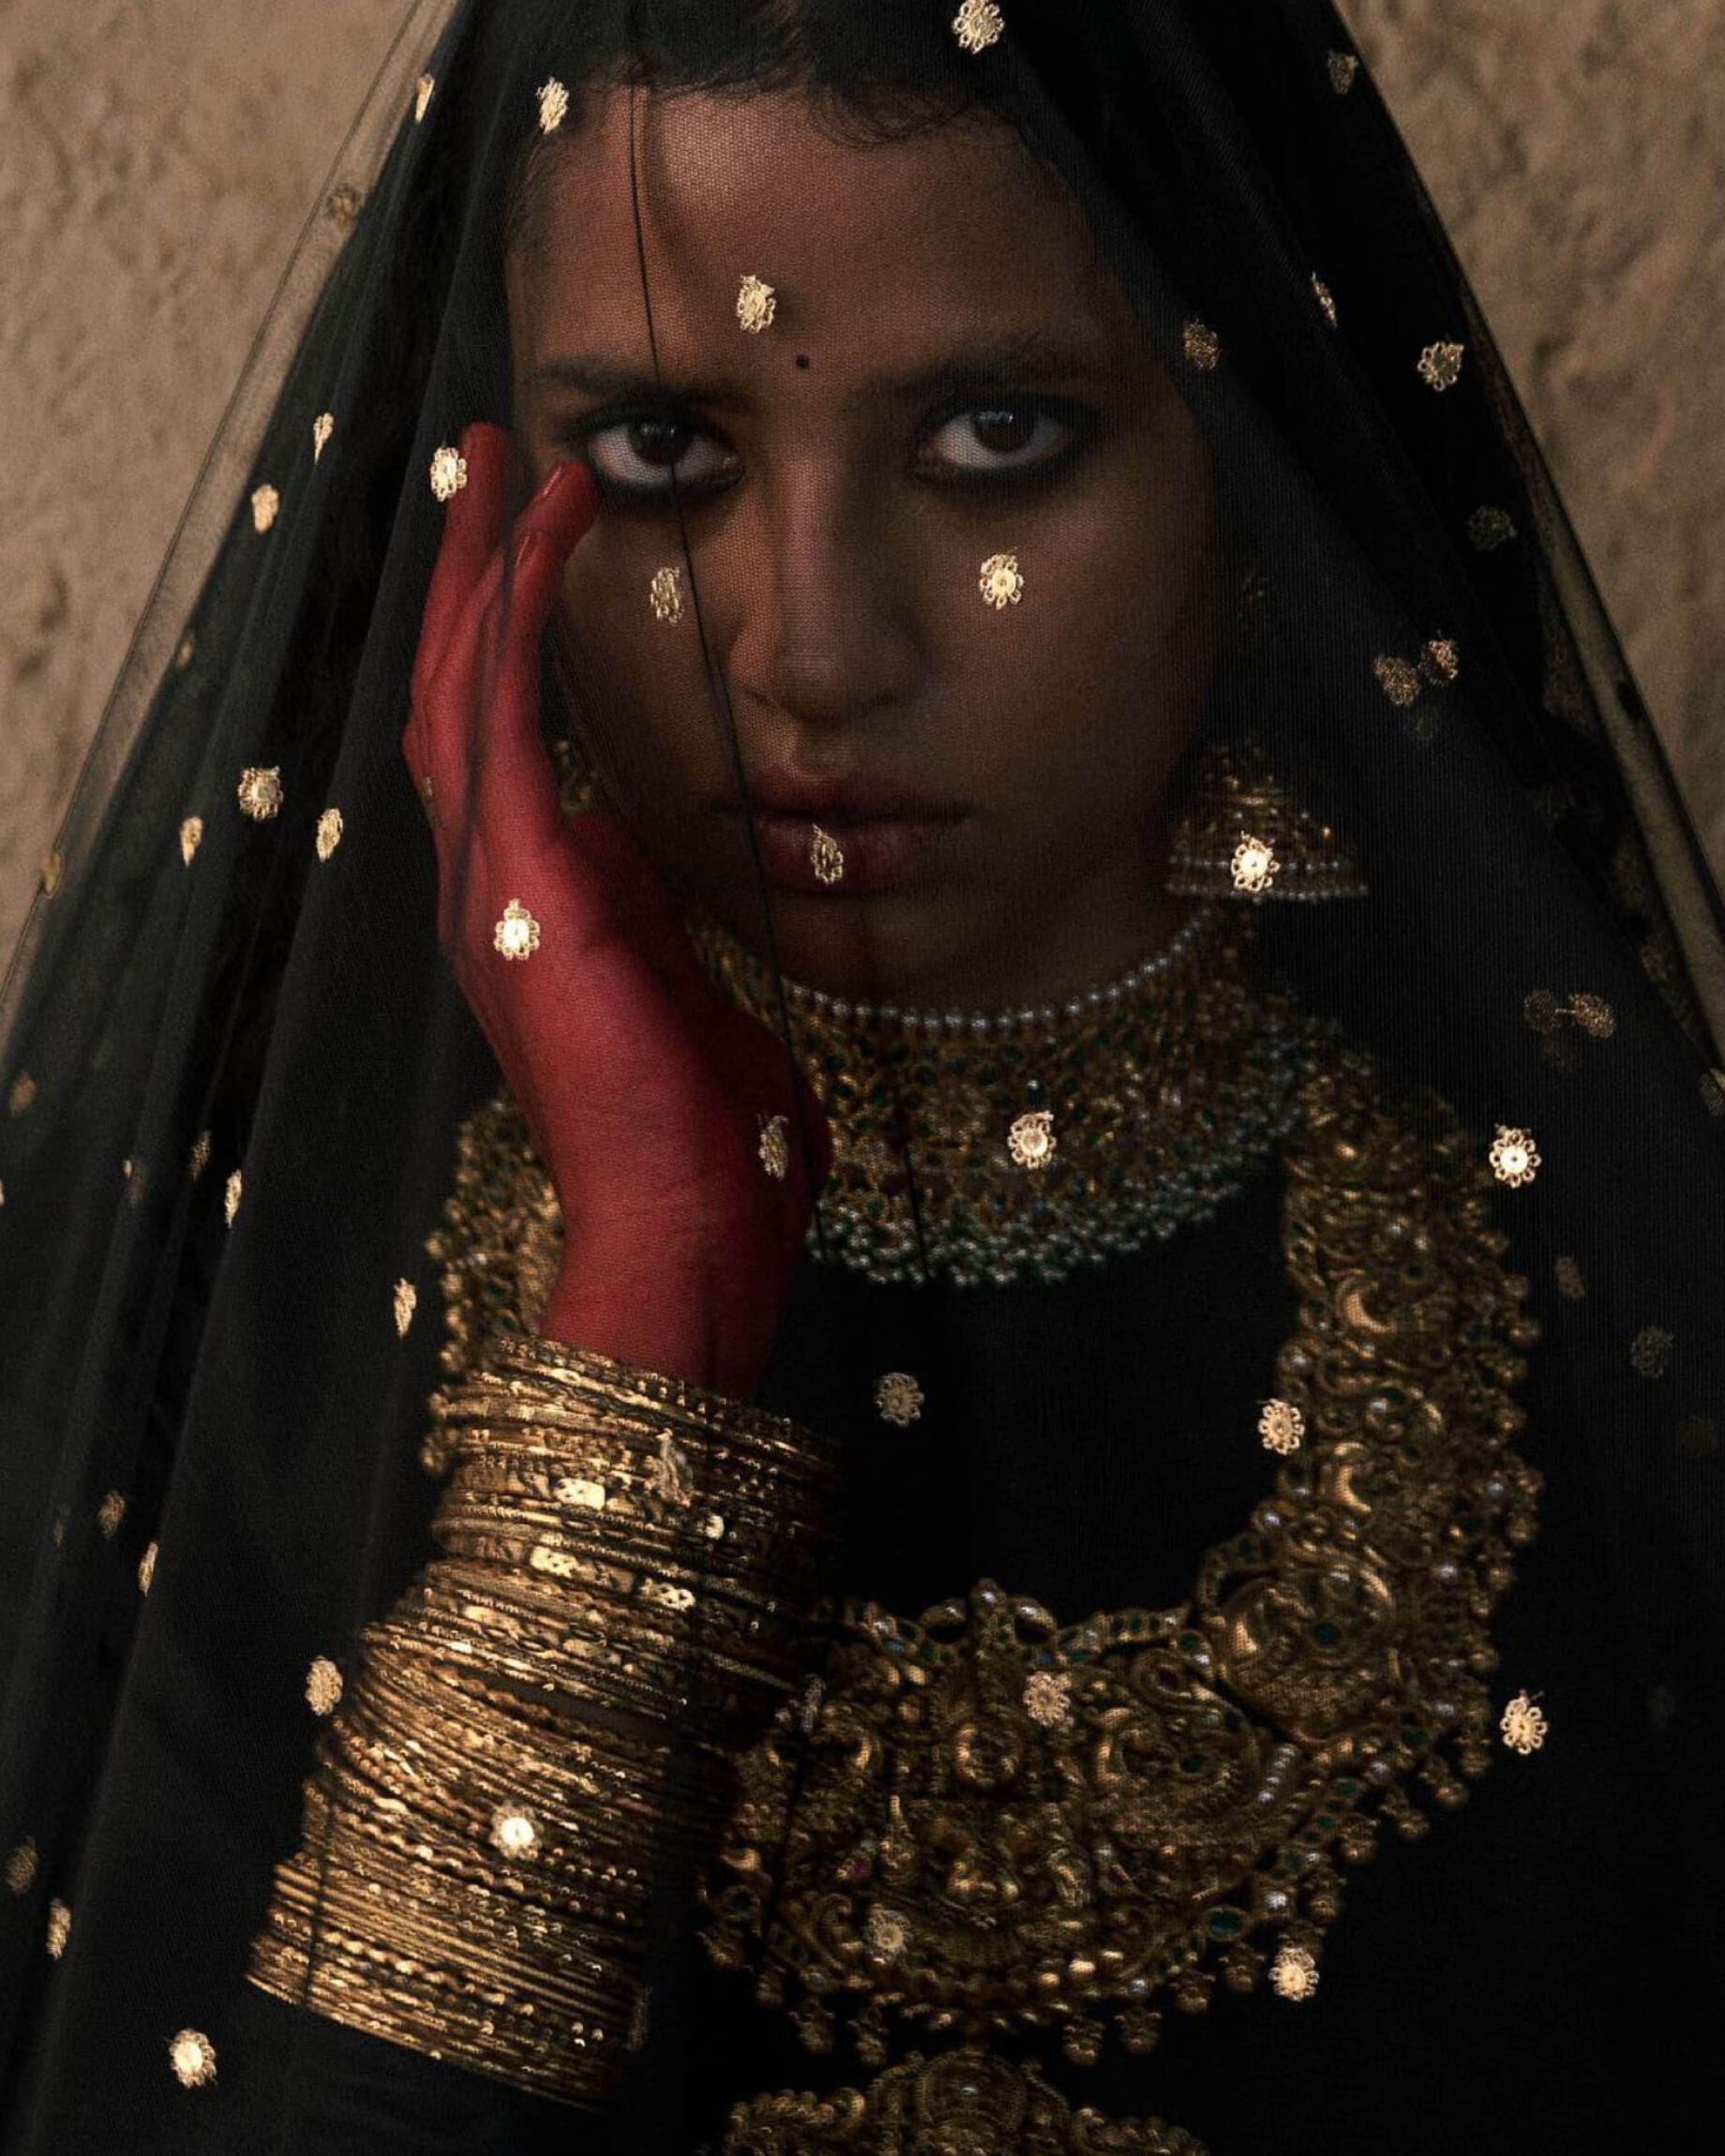 Mumbai creatives | A woman wearing dark eyeliner wearing a traditional veil over her face.